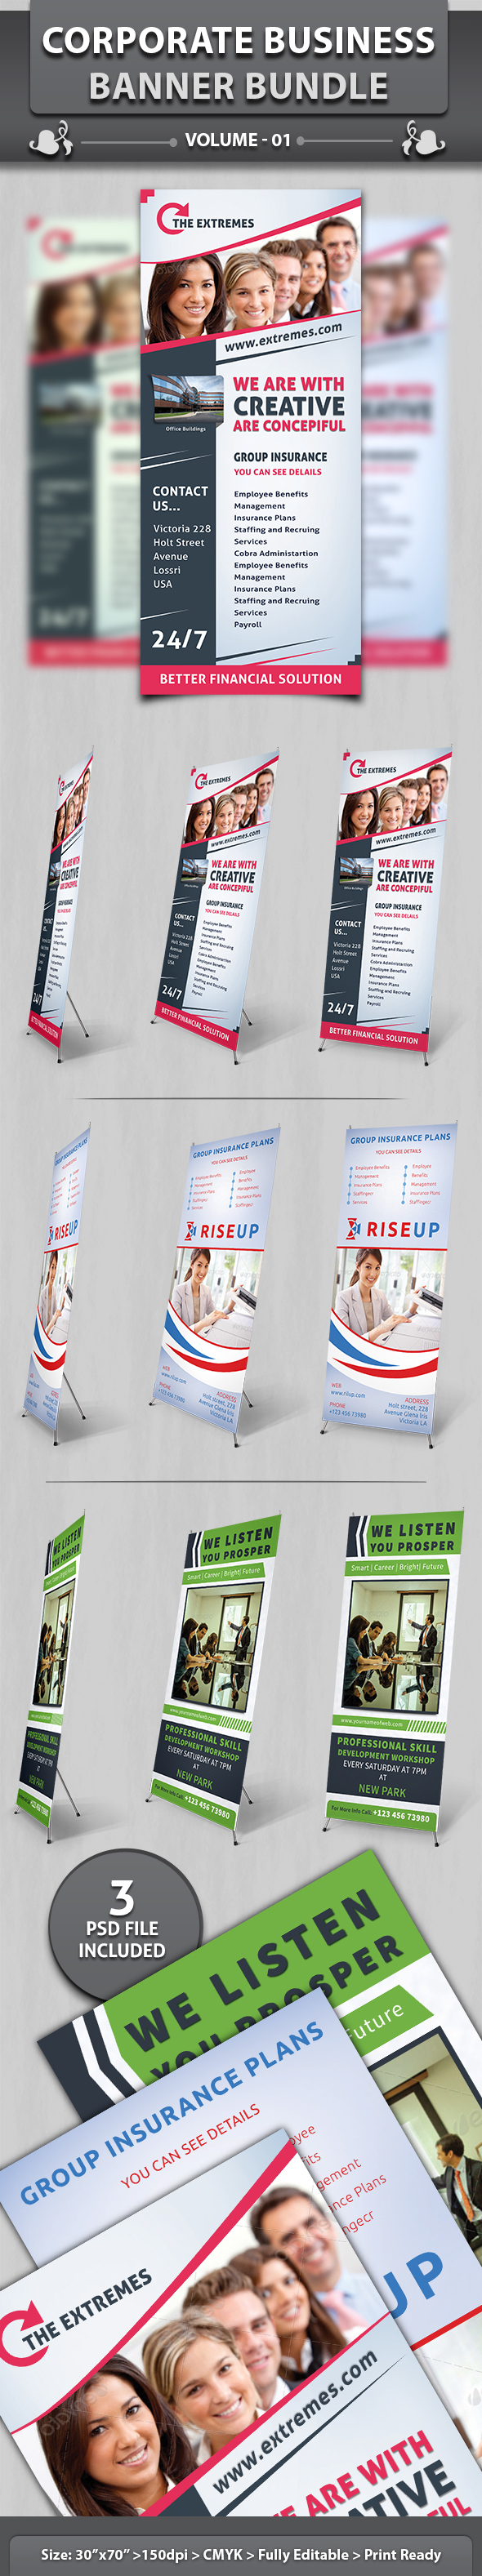 service advertising people Man Product group advertise community promote professional career Private profile commerce branding industry biz agency roll-up bazaar Creative Common